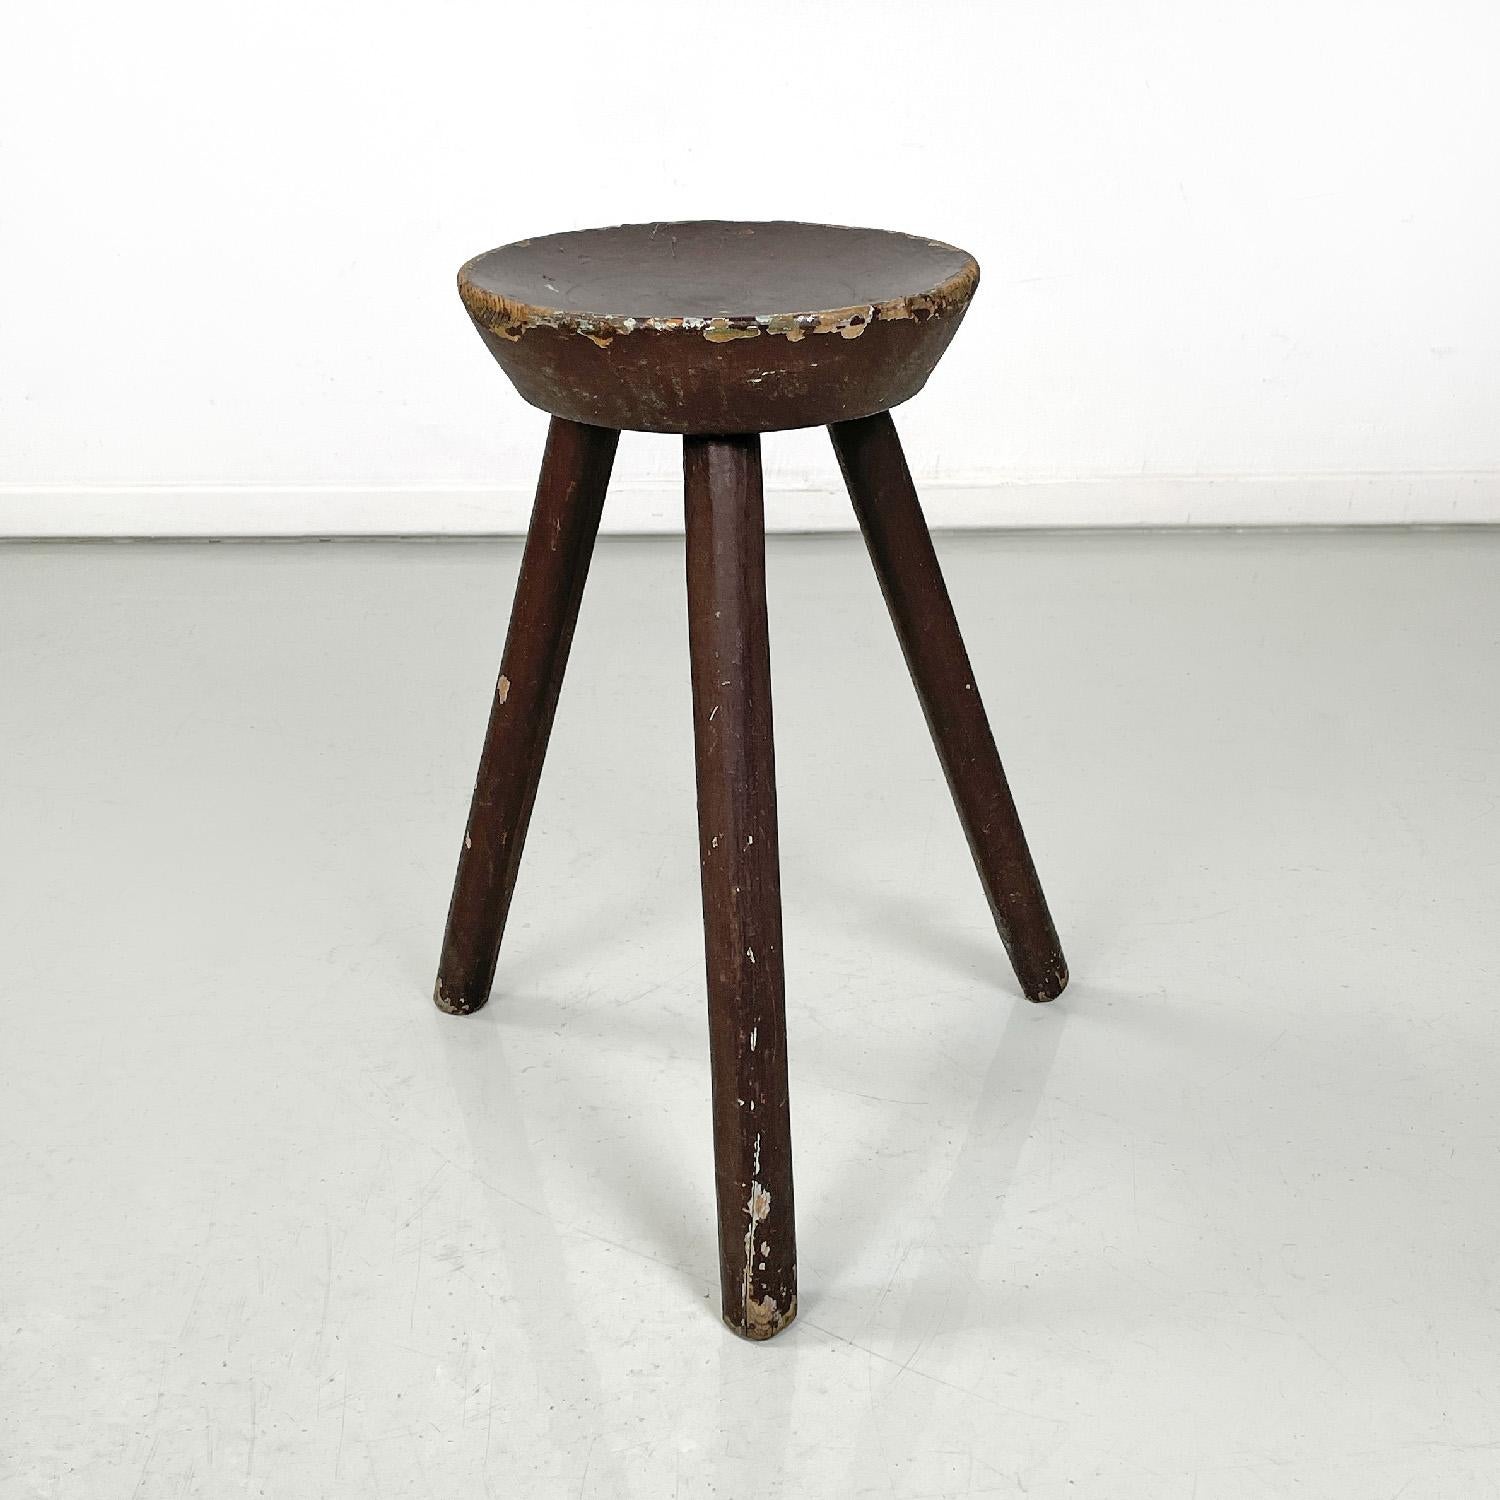 Italian Art Deco brown painted wooden stool with three legs, 1920s
Stool in brown painted wood. The seat is round and convex, has three legs with a rectangular section with rounded corners.
1920s.
Vintage condition, it shows signs of use and age,